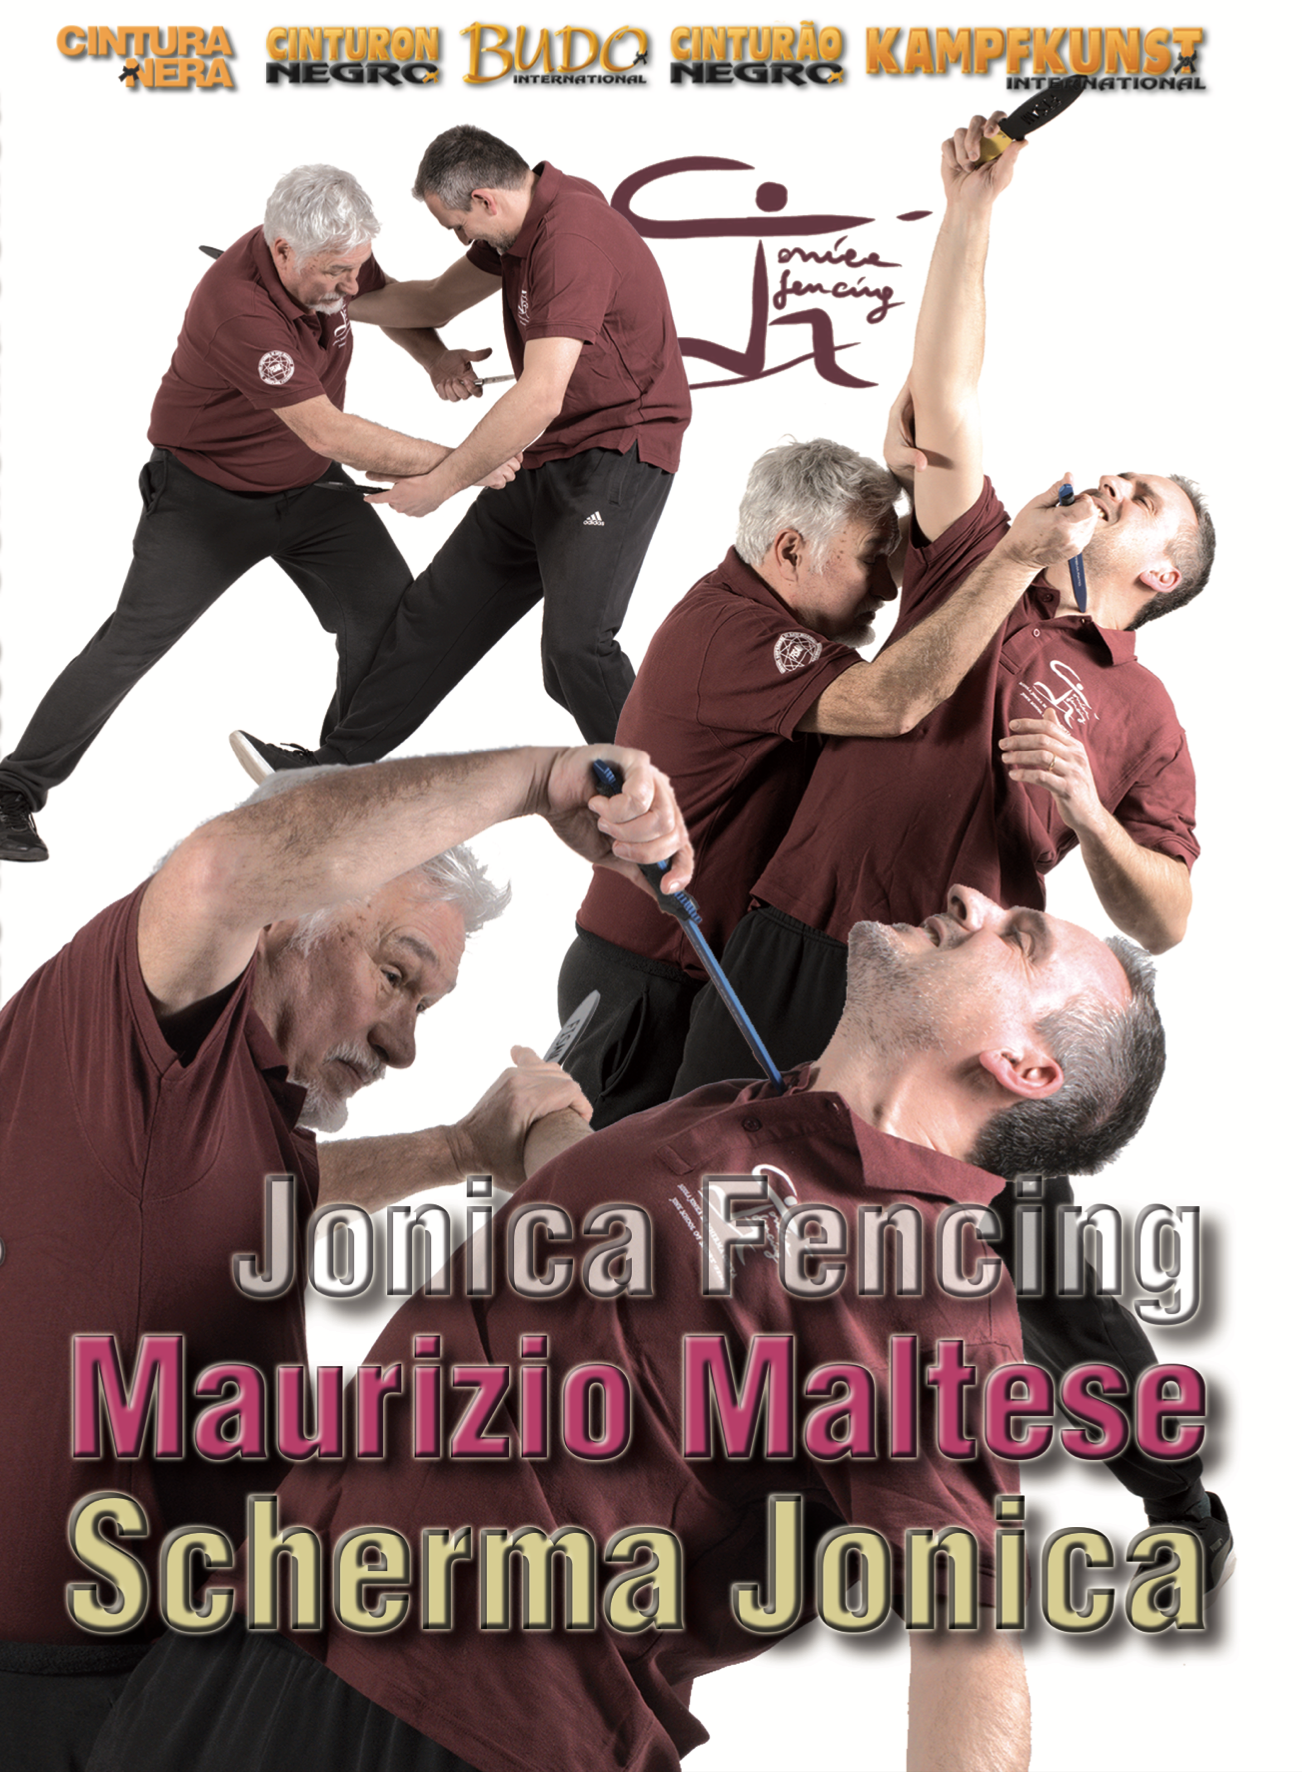 Ionian Fencing by Maurizio Maltese (On Demand)